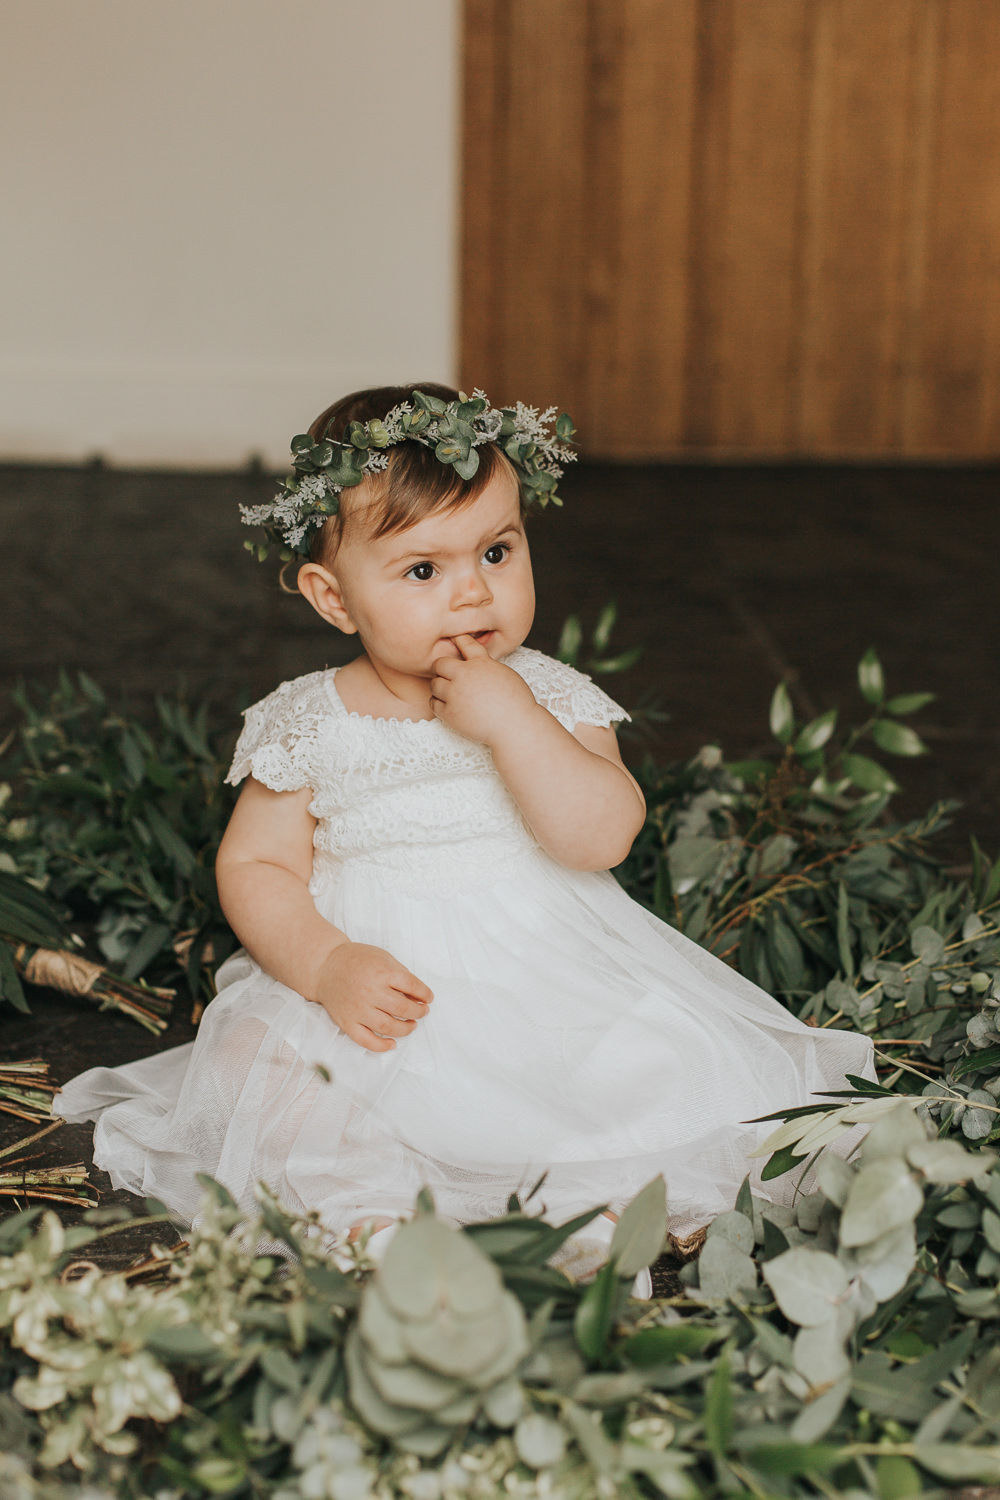 The daughter of the couple was dressed in a cute lace gown and a greenery crown